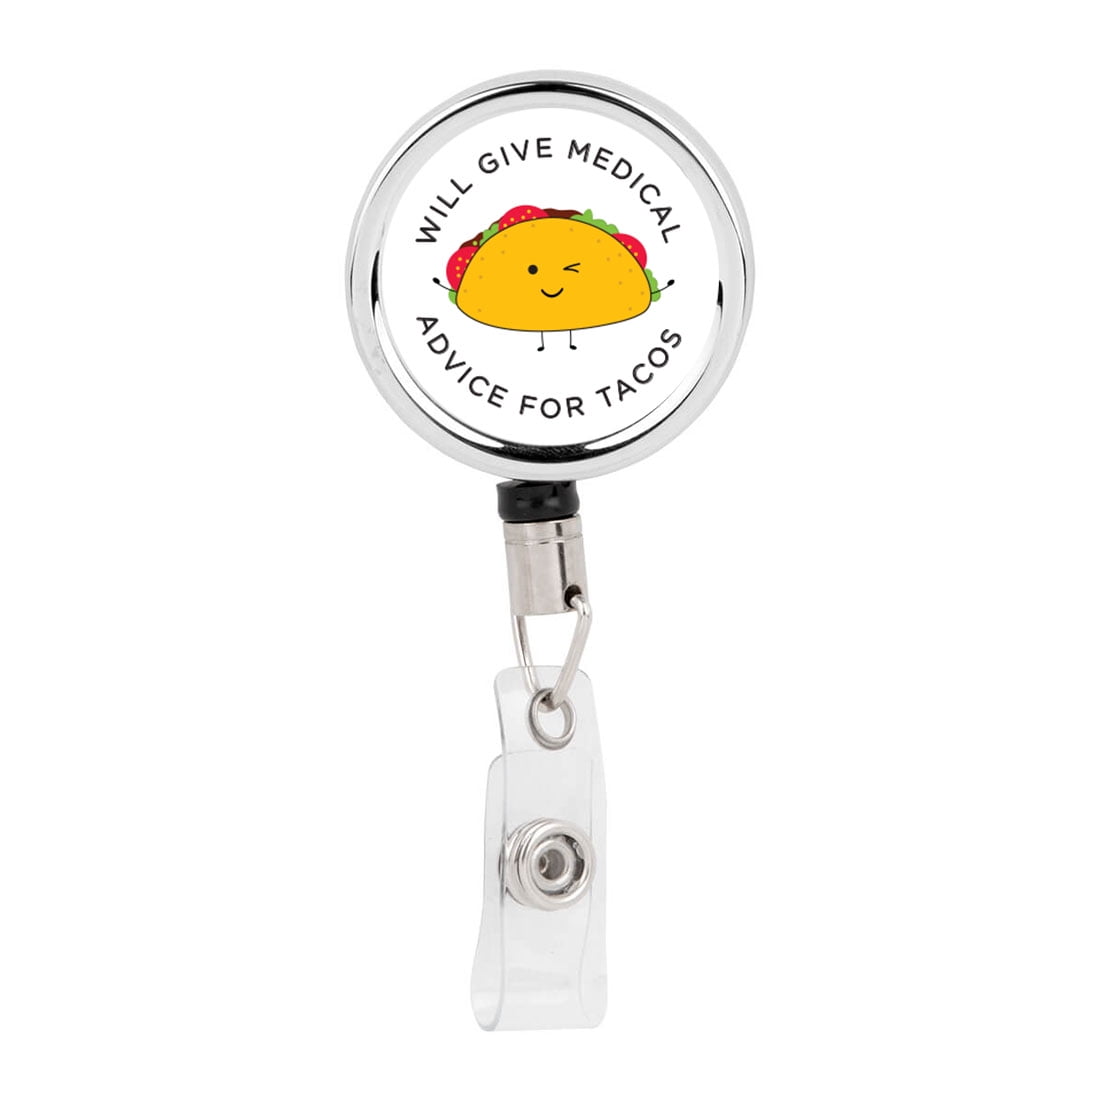 Koyal-Wholesale-Retractable-Badge-Reel-Holder-With-Clip -Will-Give-Medical-Advice-For-Tacos-Funny-Food-Pun-Anime_fecdd535-281a-4082-8eec-b1361d7ba2e2.